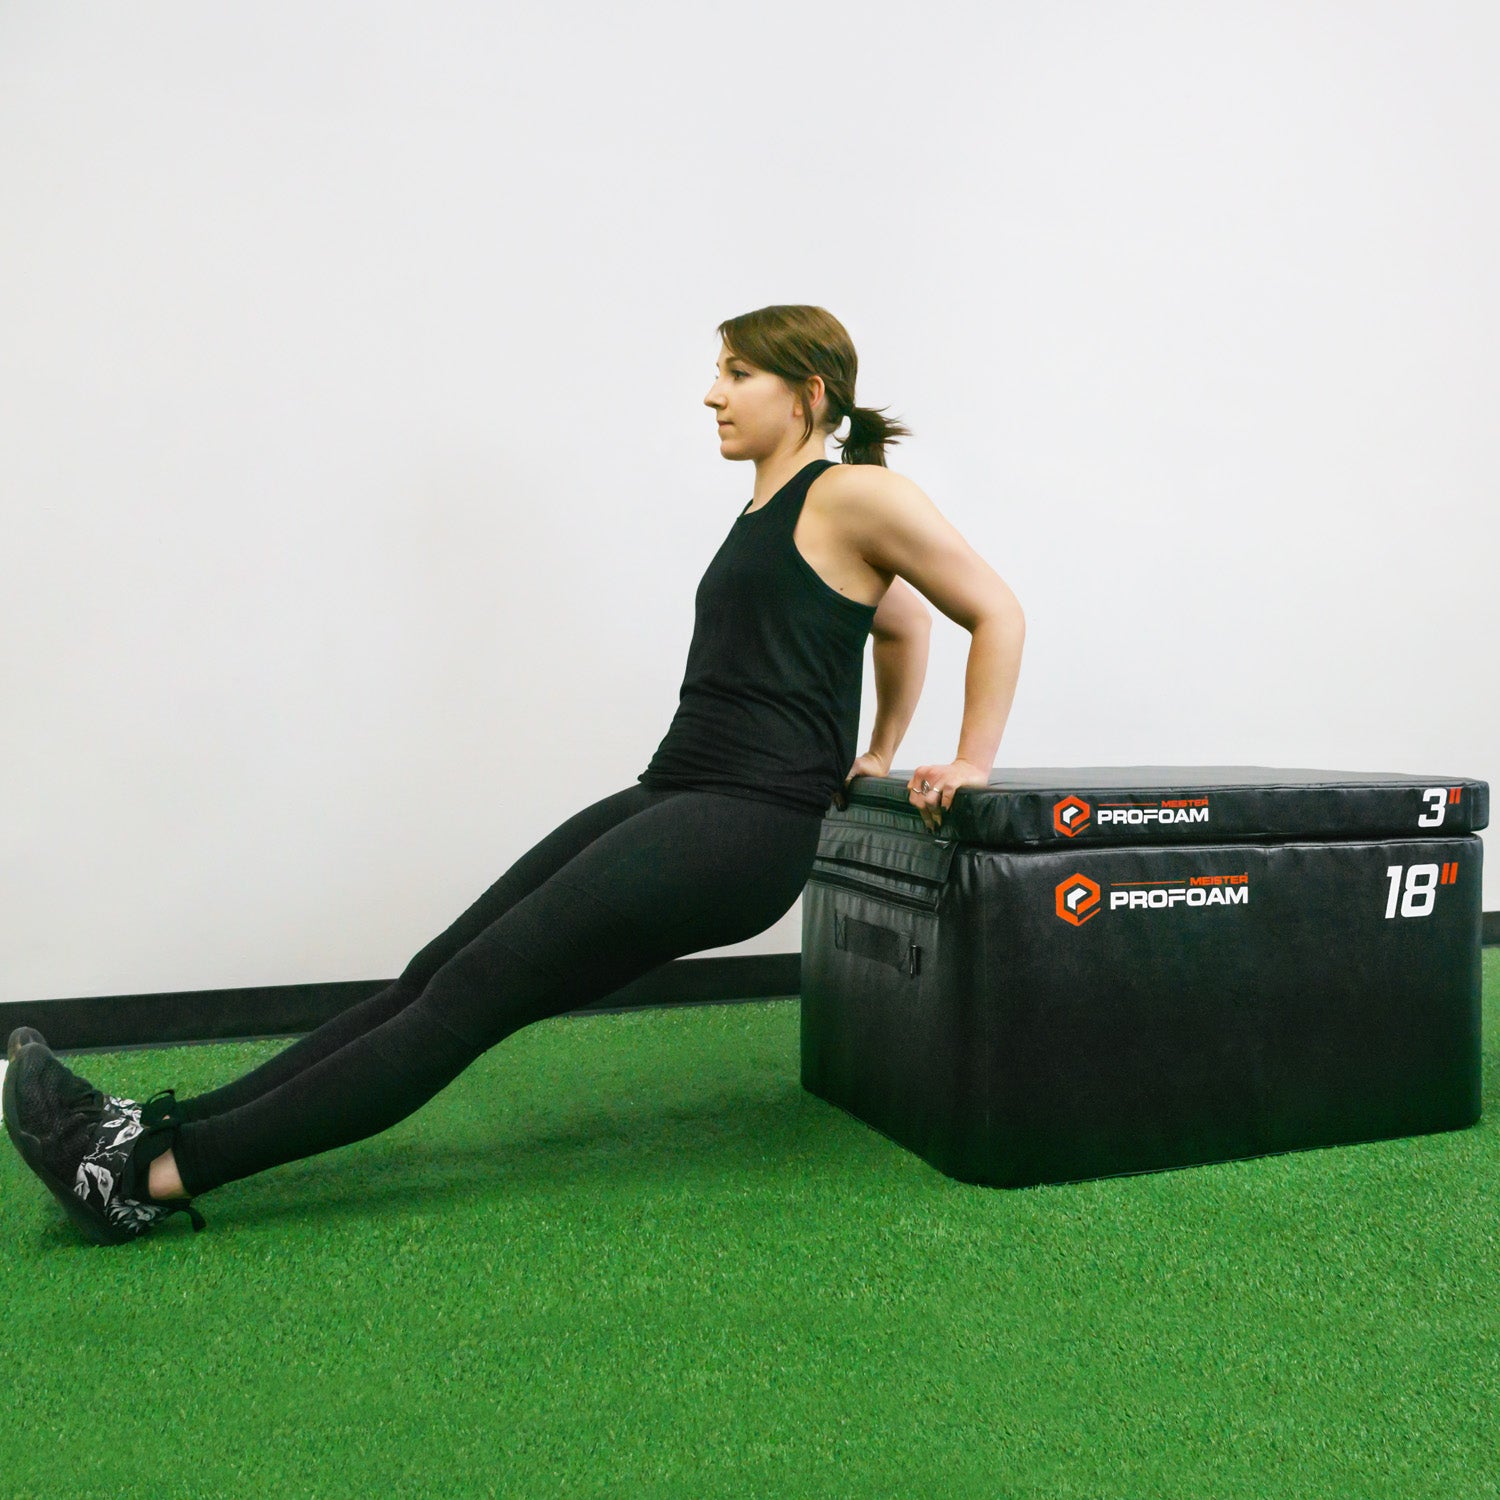 3" Meister PROFOAM™ Plyo Box for Professional Gyms